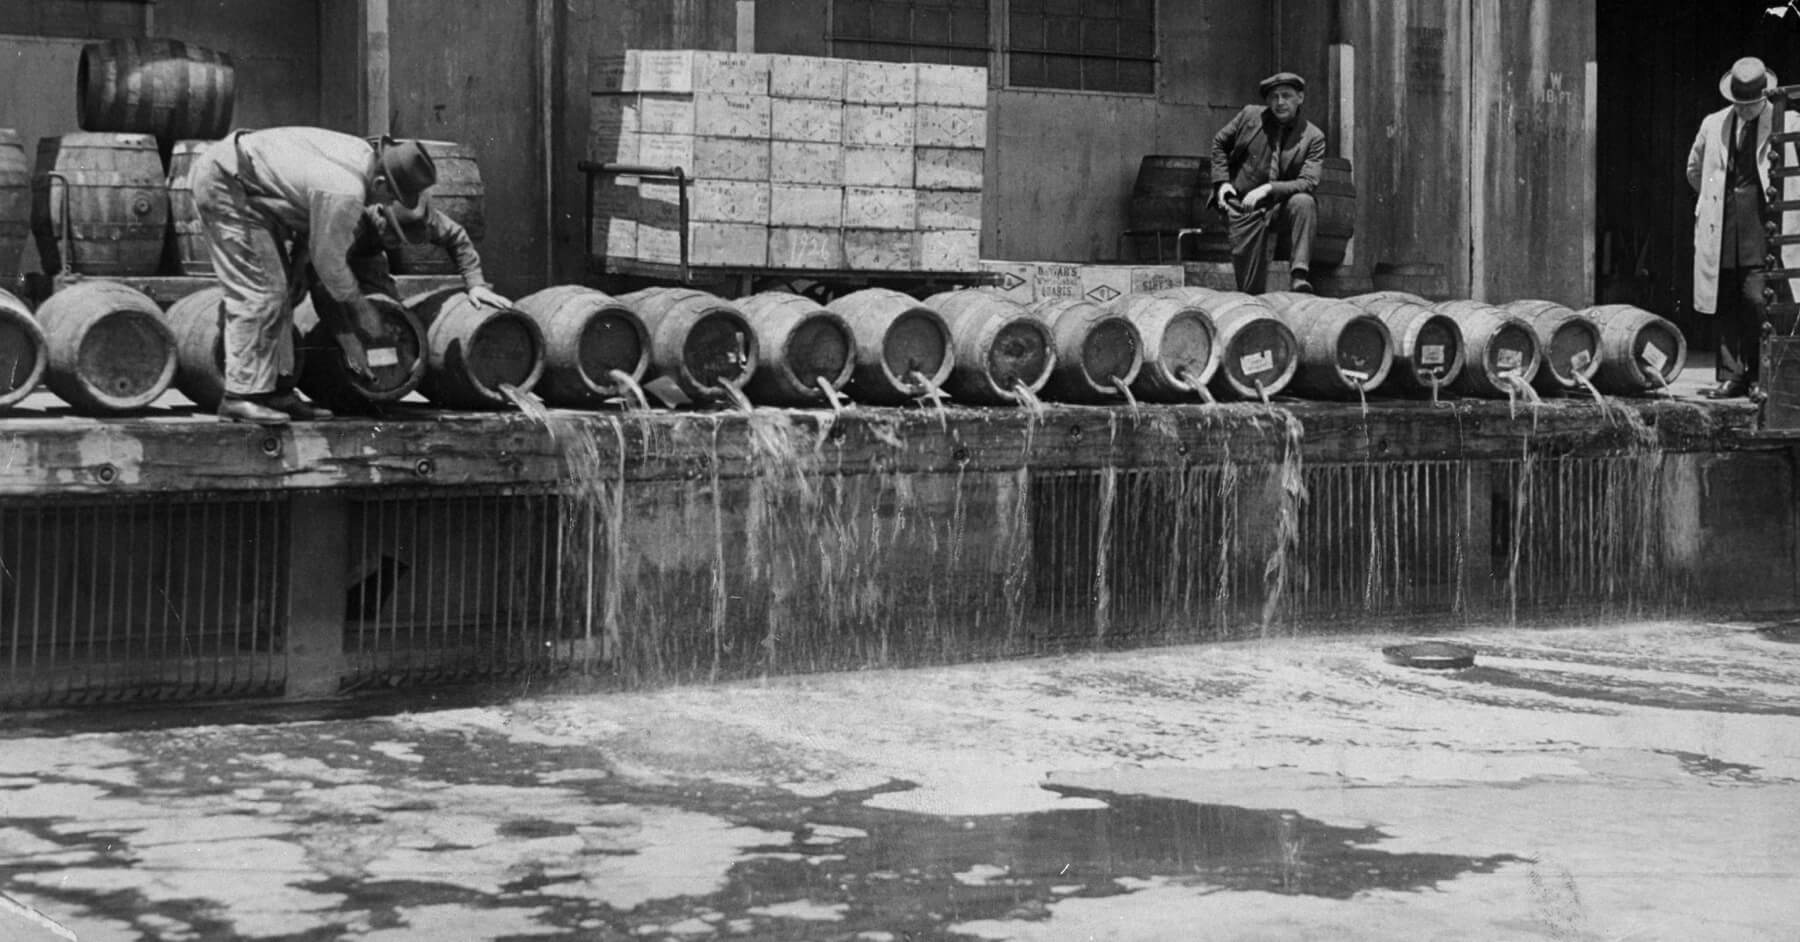 Alcohol Prohibition raid in the 1920s